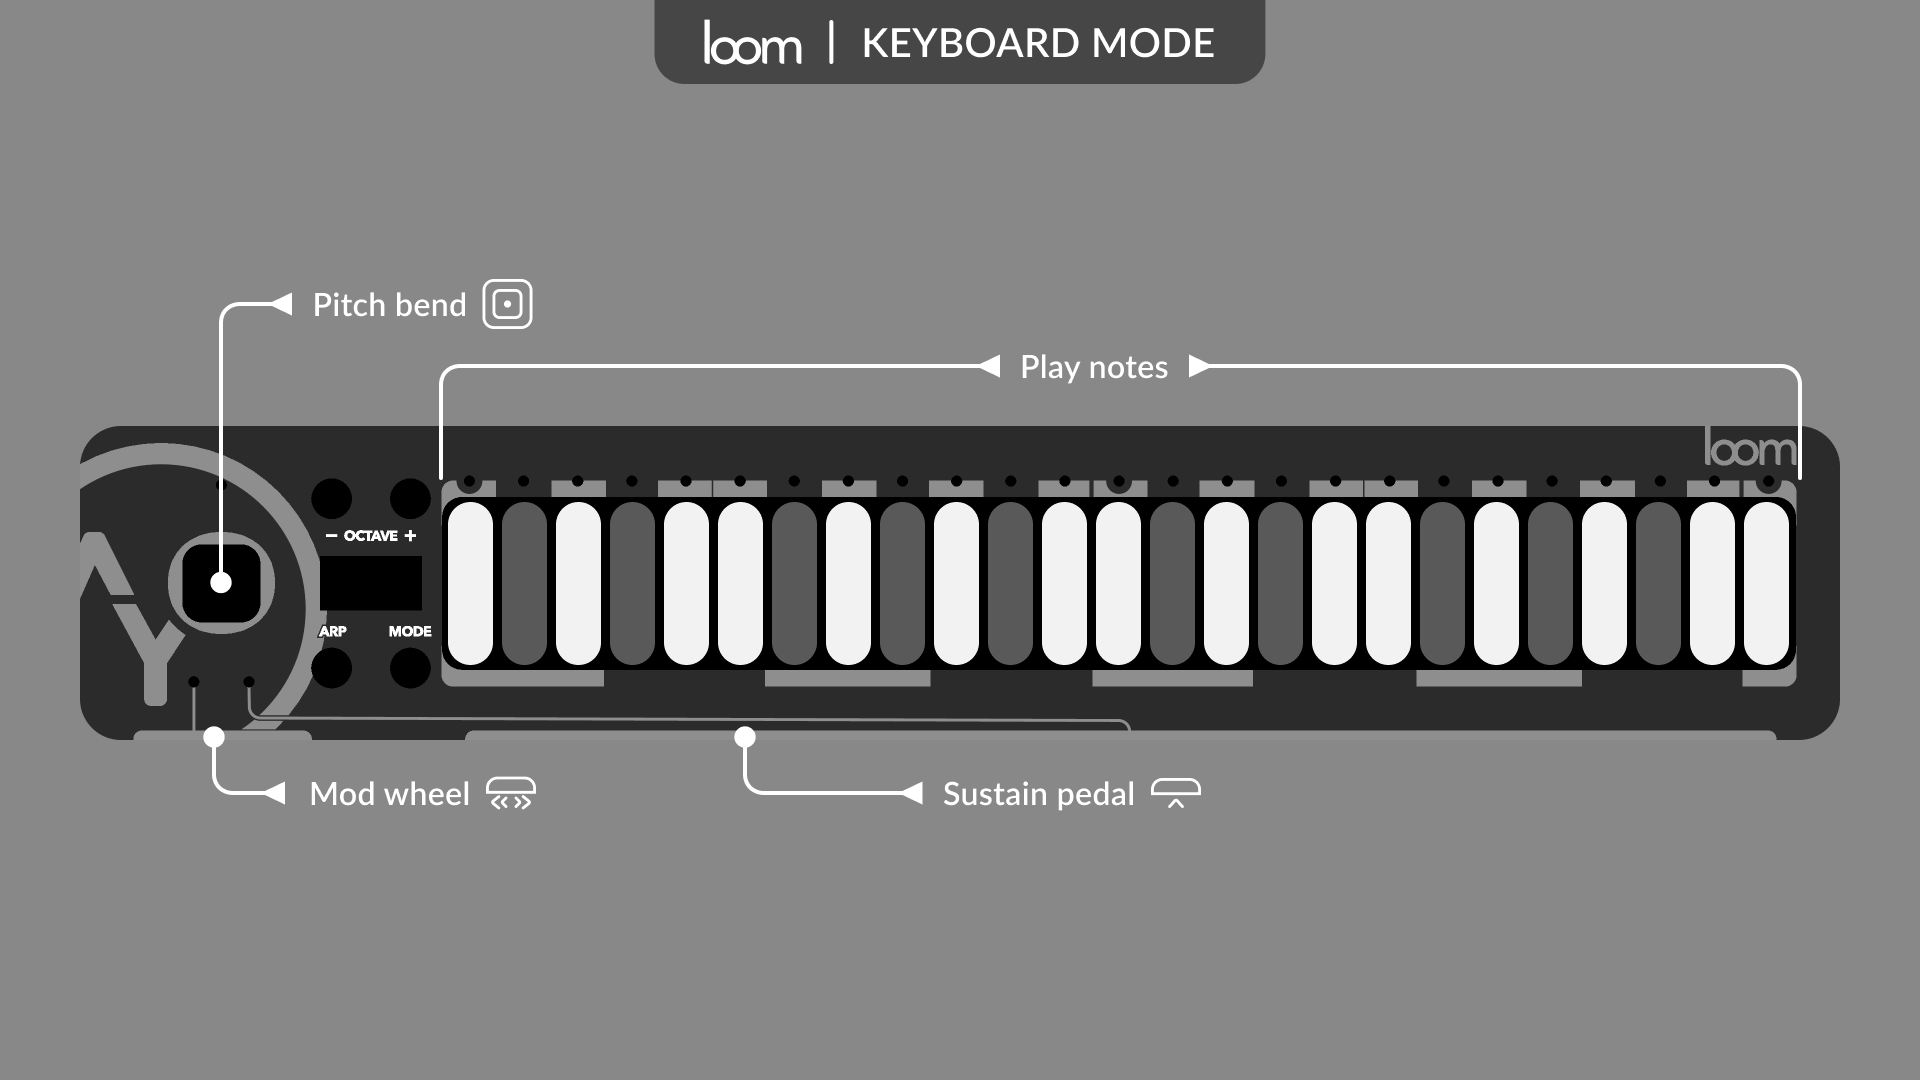 Keyboard mode with the default mapping: notes on the surface, sustain pedal on the bar, mod wheel on the slider, pitch bend on the action zone.